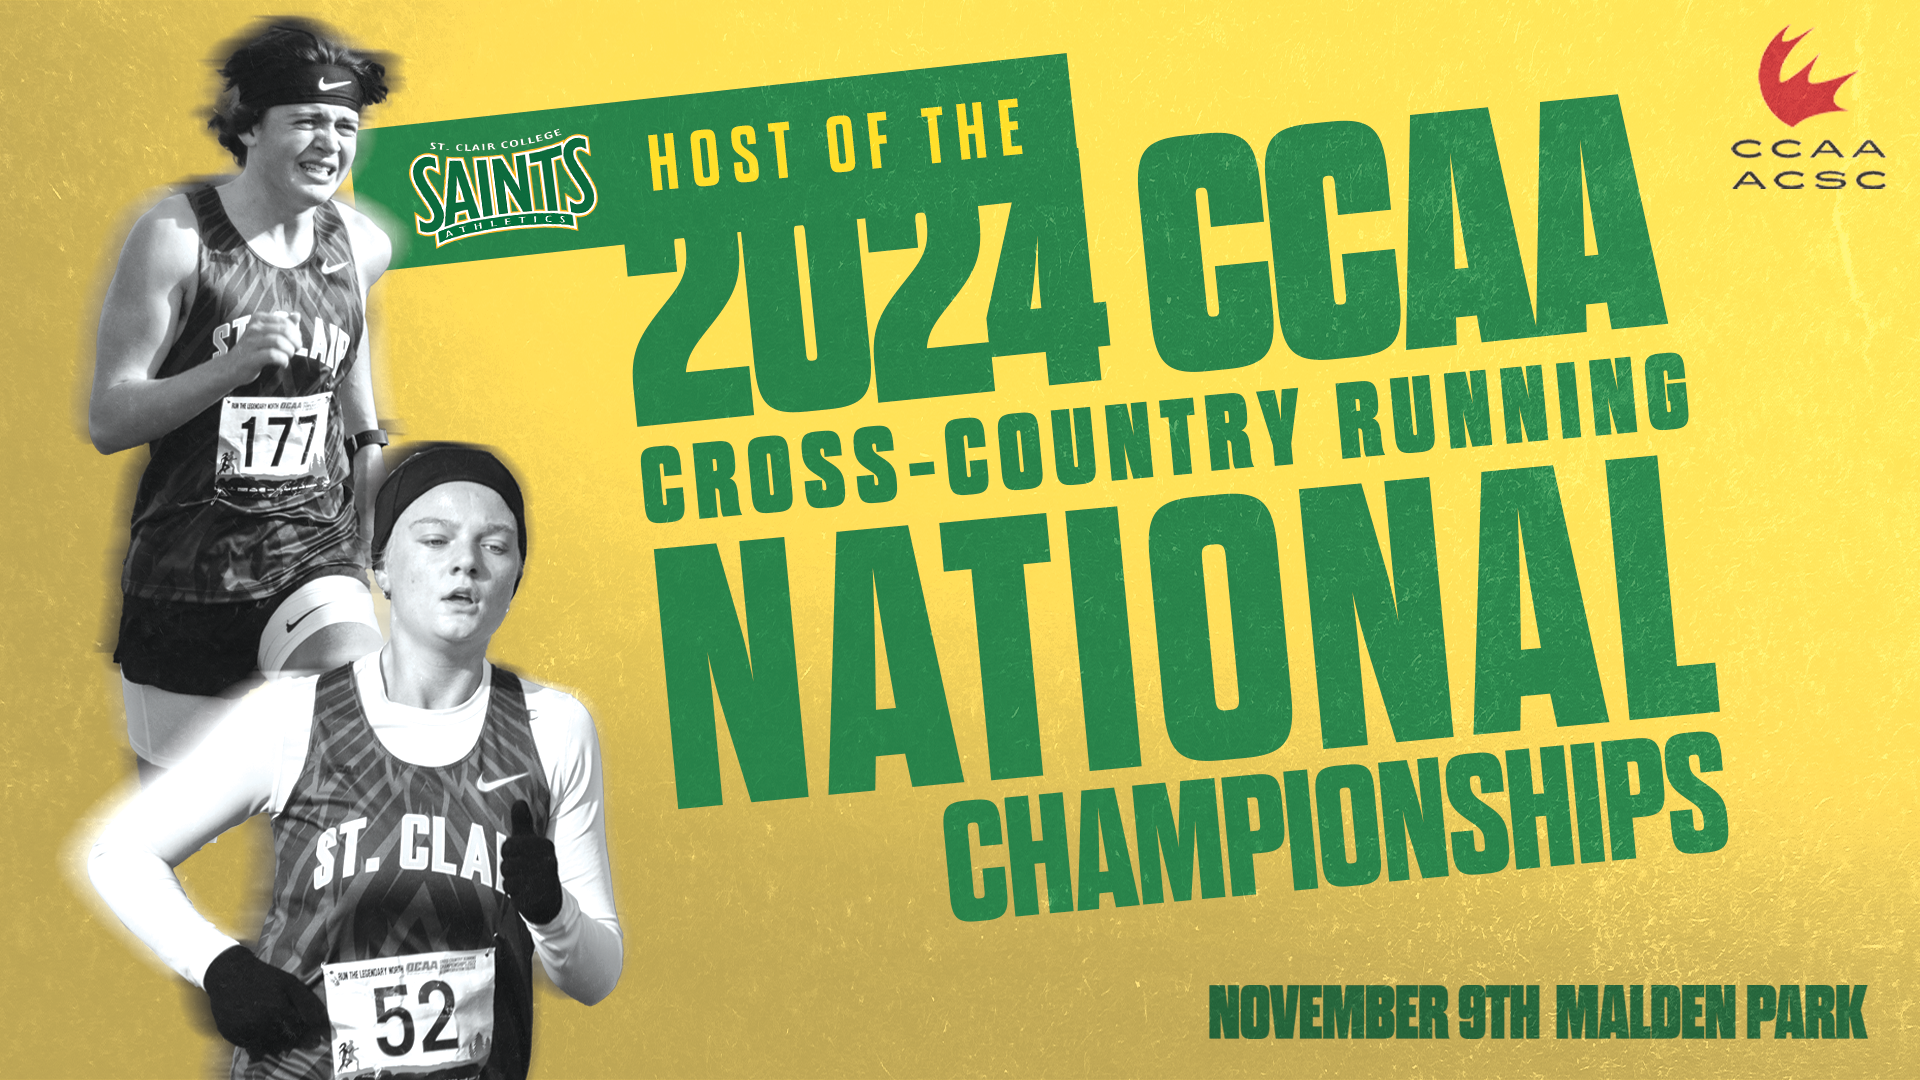 St. Clair College Selected as 2024 National Cross-Country Running Championship Host